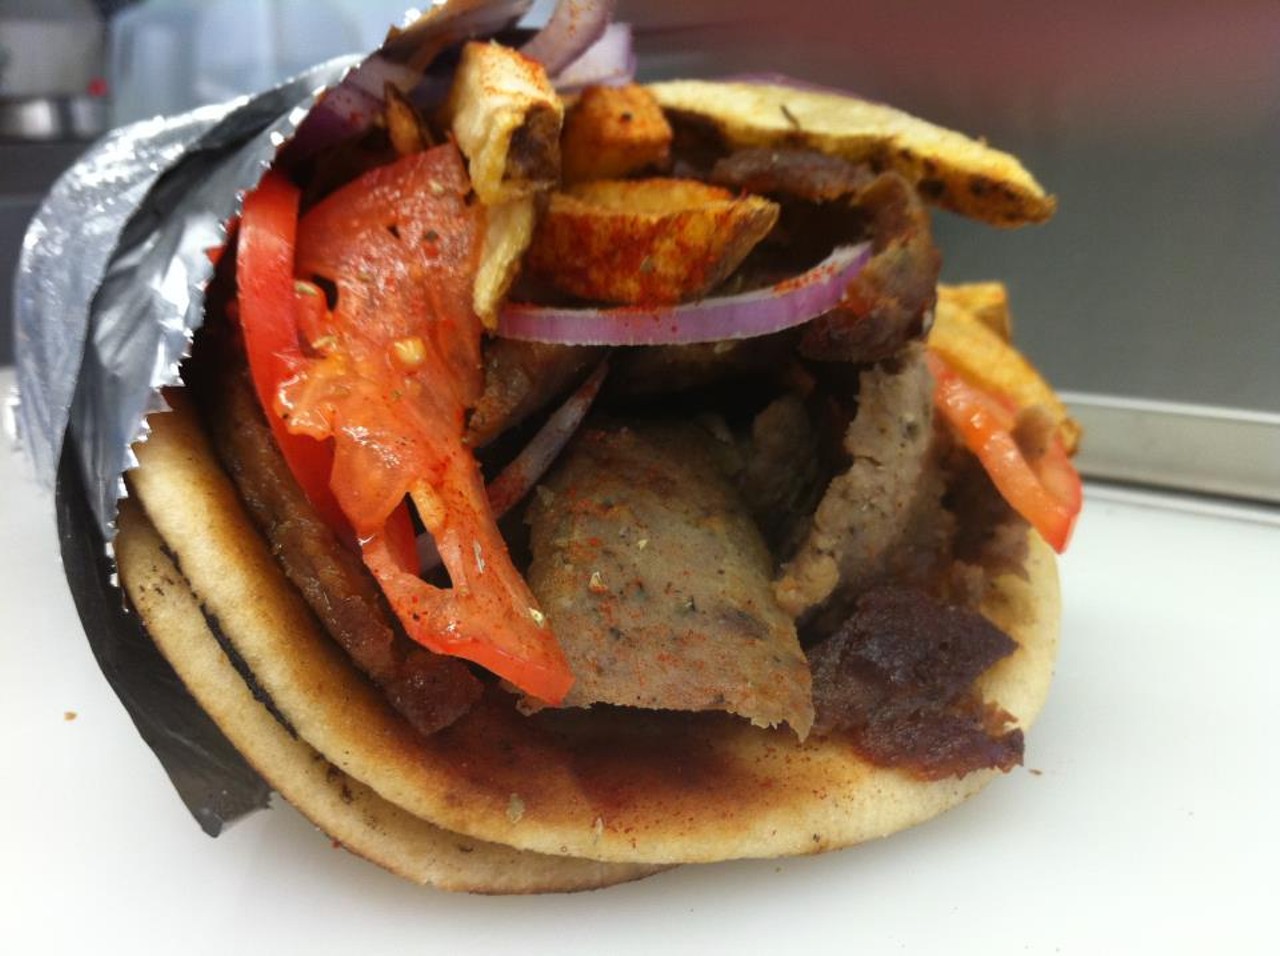 This mobile and catering truck brings a pita delight right to you. With many different takes on a gyro to choose from, we recommend going with the  Mad Mouth Gyro. Double the gyro meat, onion, tomatoes, and tzatziki sauce are wrapped in two- not one- pitas!